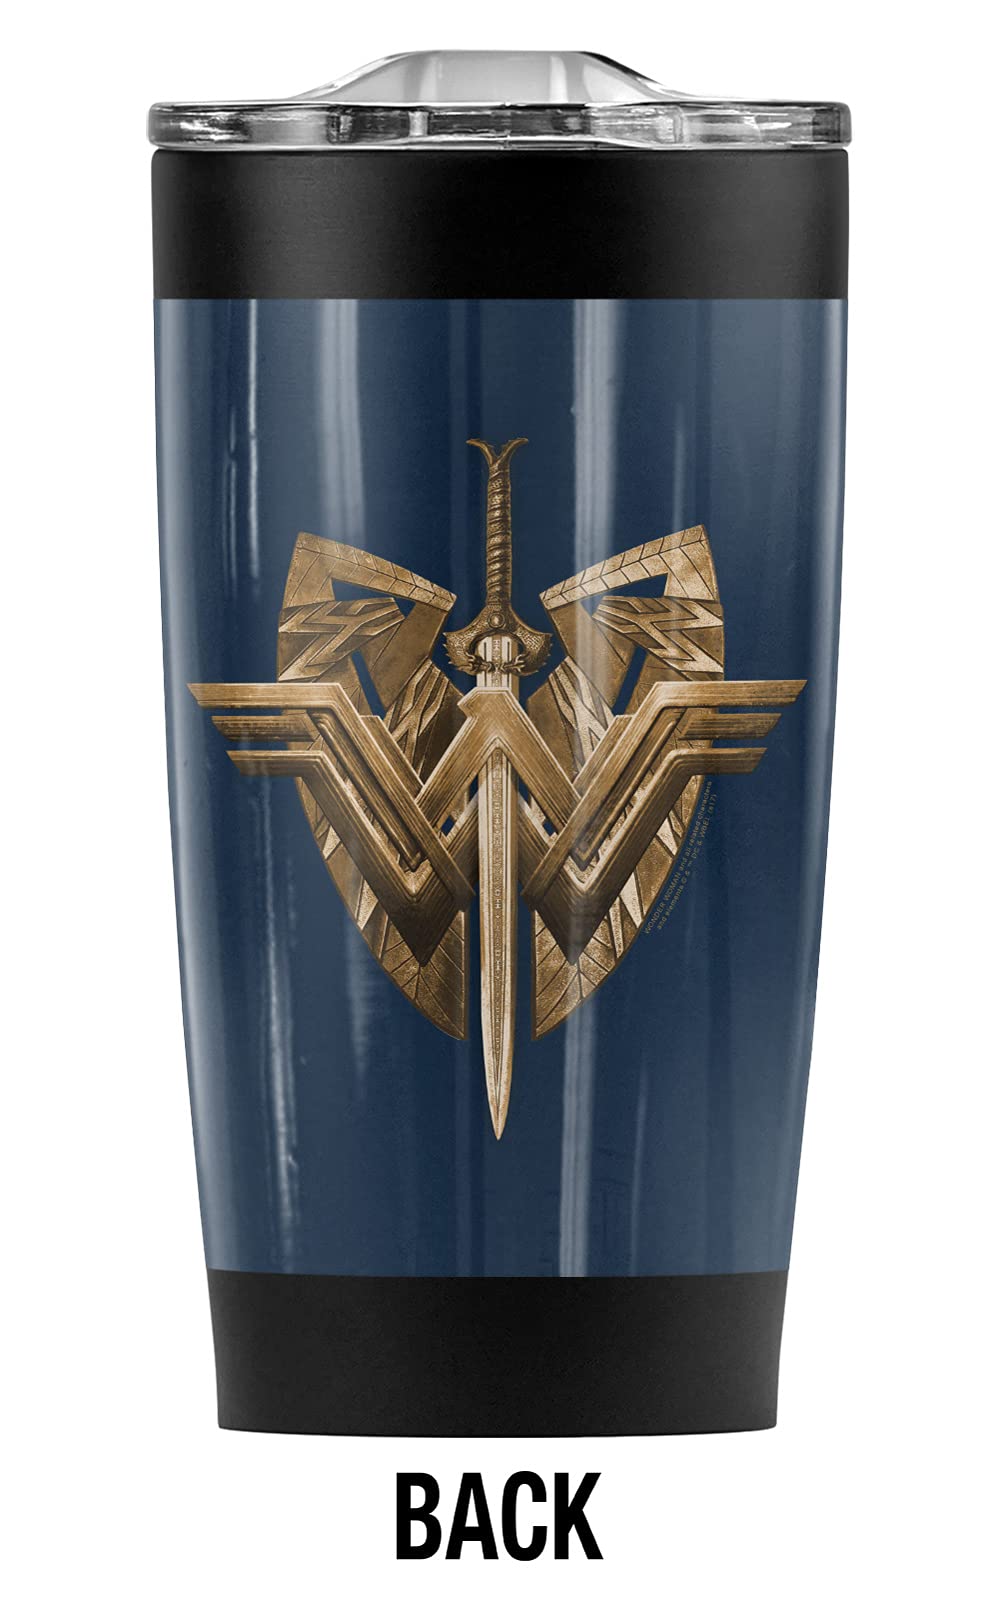 Logovision Wonder Woman Movie Sword Emblem Stainless Steel Tumbler 20 oz Coffee Travel Mug/Cup, Vacuum Insulated & Double Wall with Leakproof Sliding Lid | Great for Hot Drinks and Cold Beverages